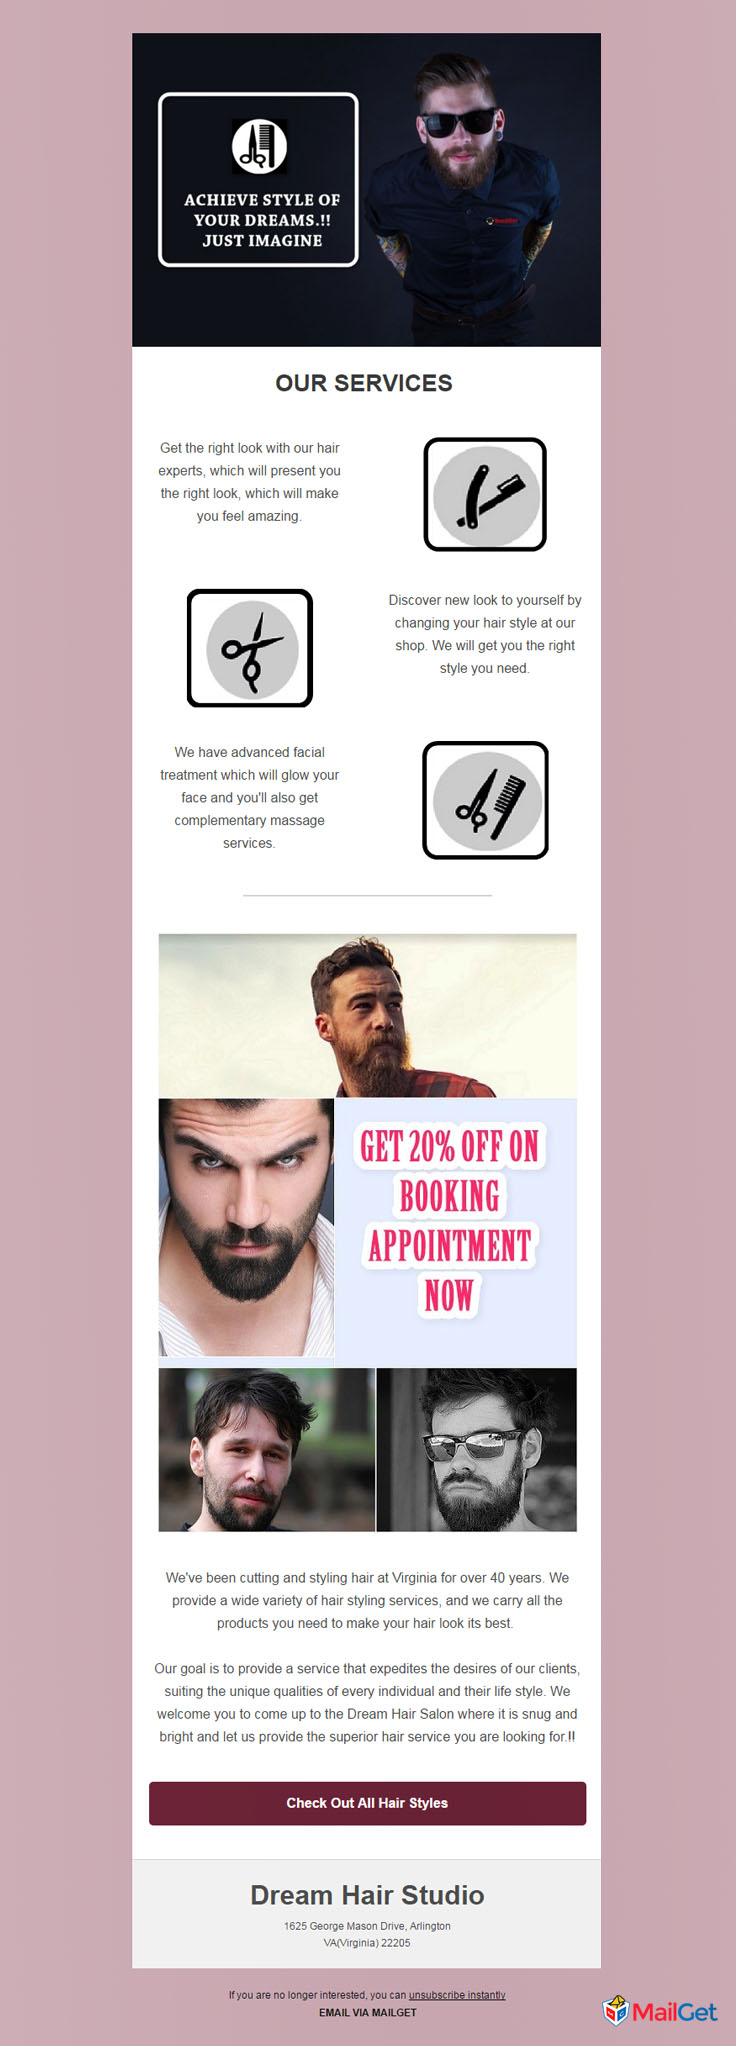 free-hair-salon-email-newsletter-templates-3-MailGet